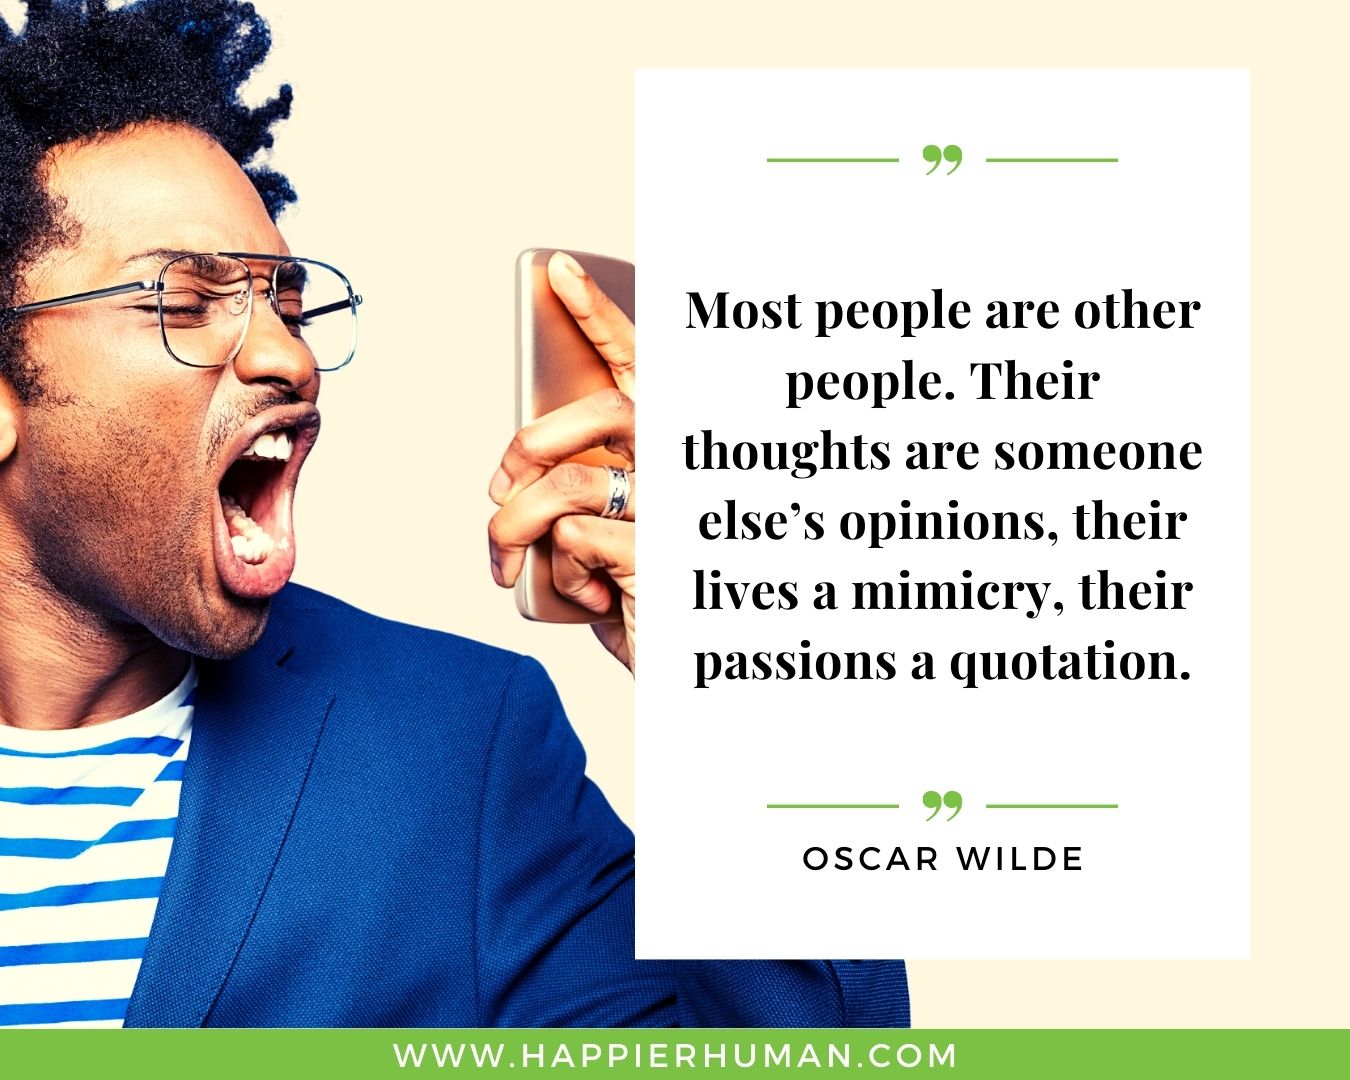 Haters Quotes - “Most people are other people. Their thoughts are someone else’s opinions, their lives a mimicry, their passions a quotation.“ - Oscar Wilde